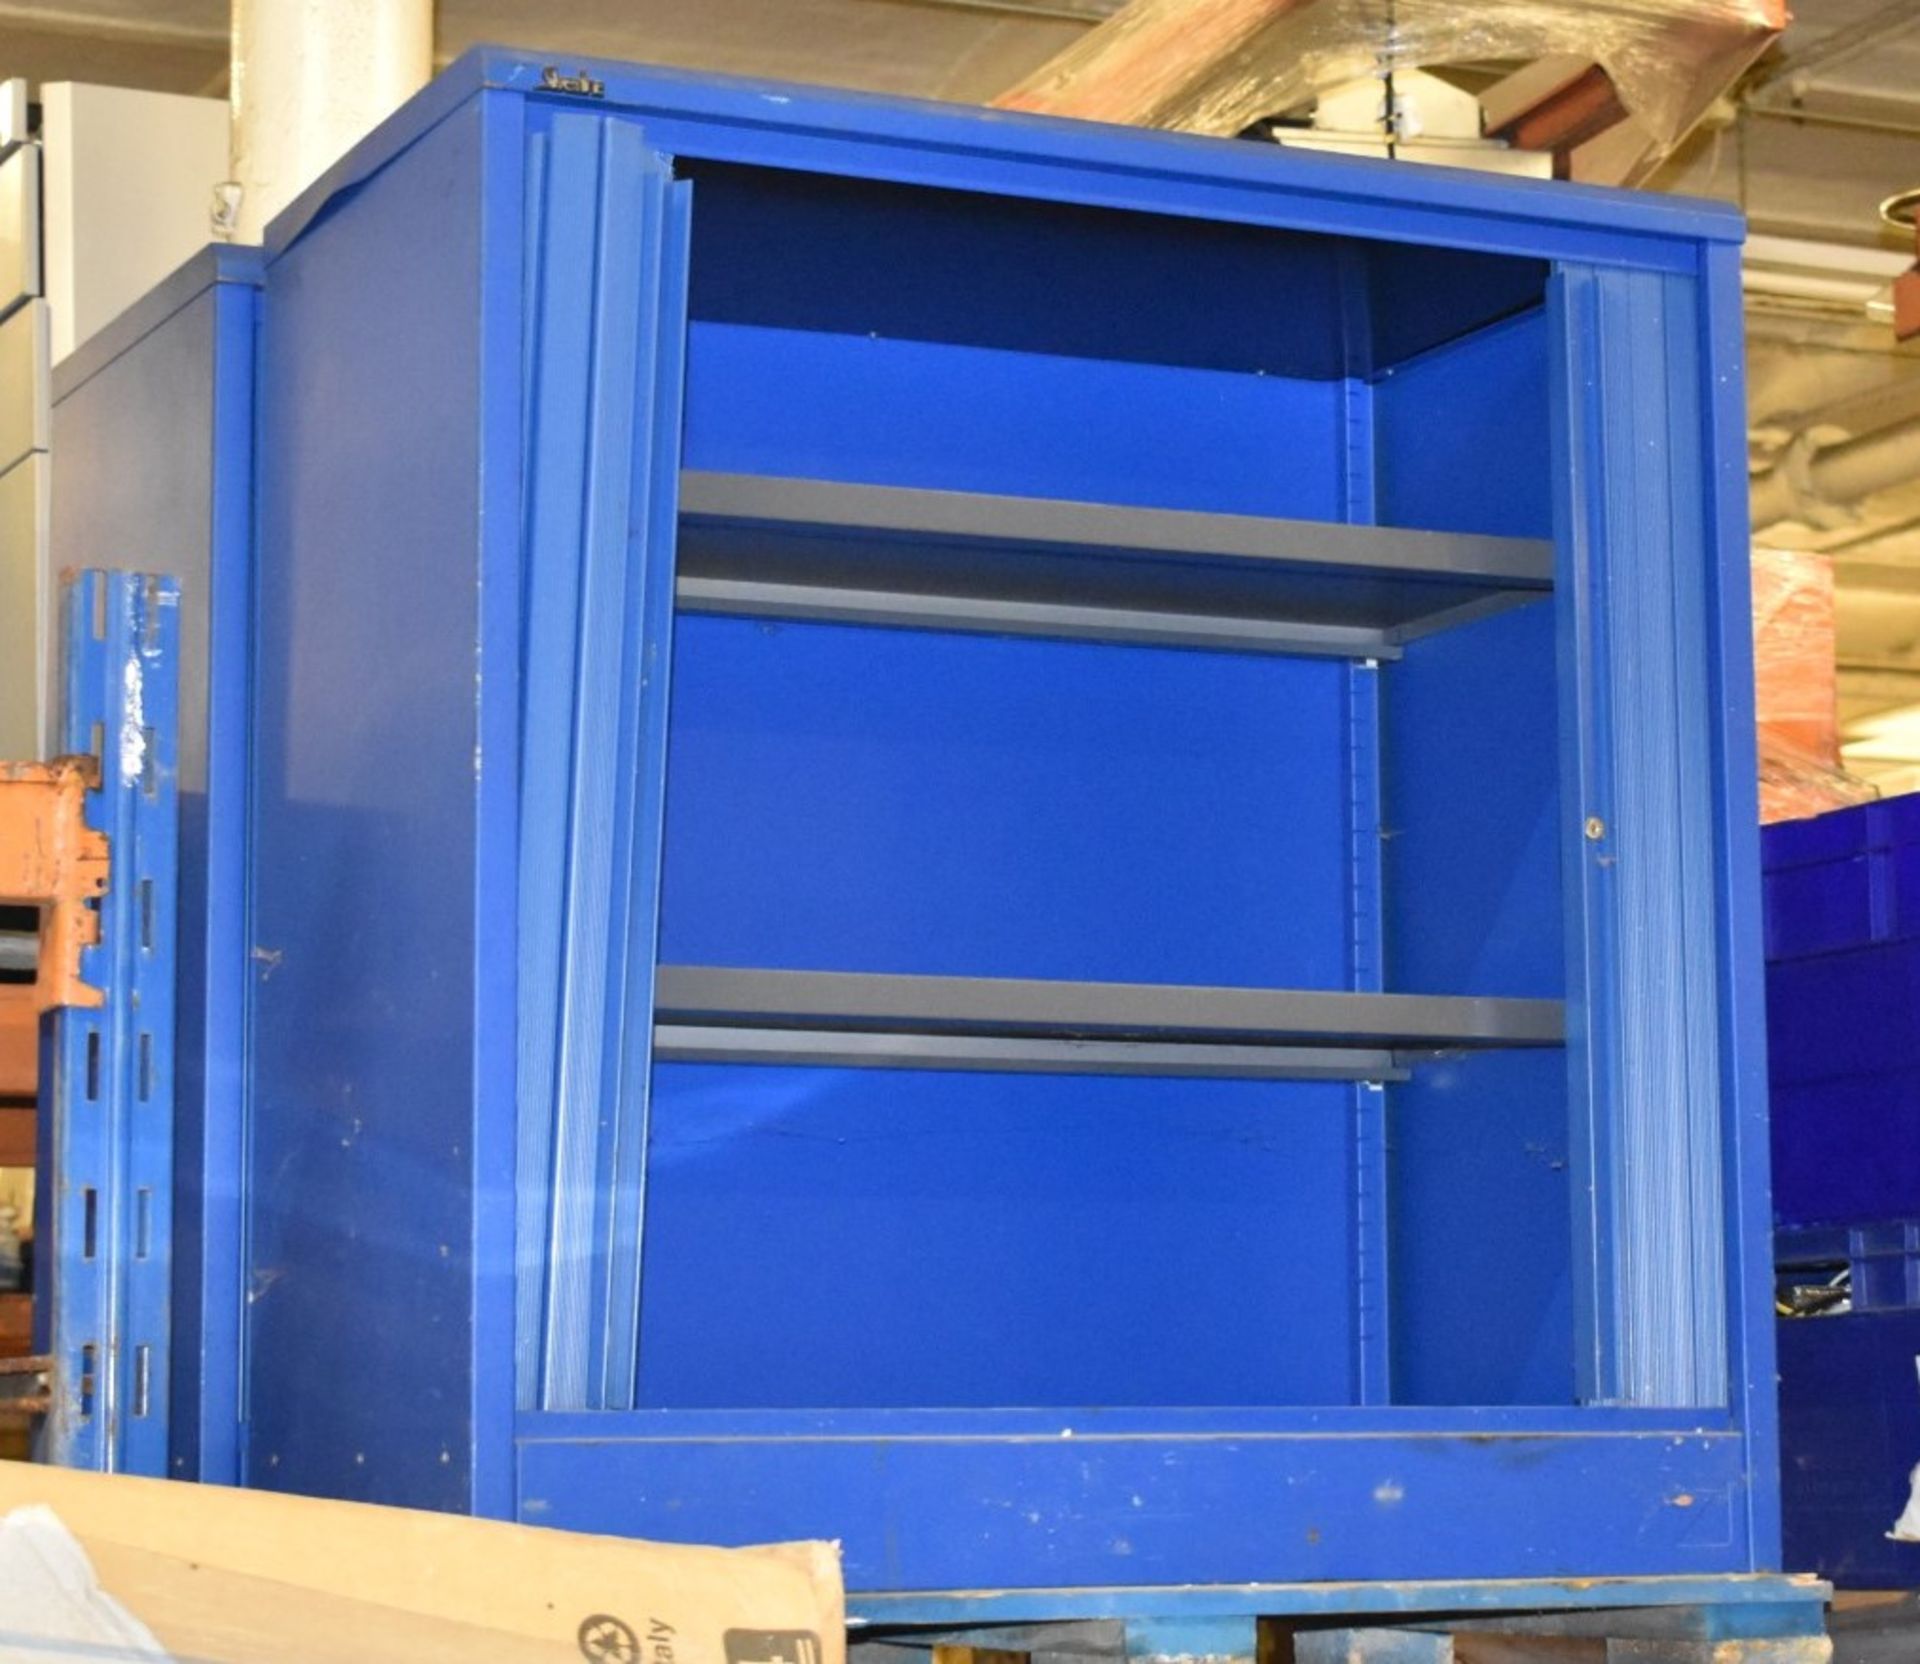 2 x Blue Silverline Office Storage Cabinets - Rolling Doors Need Attention - CL011 - Location: